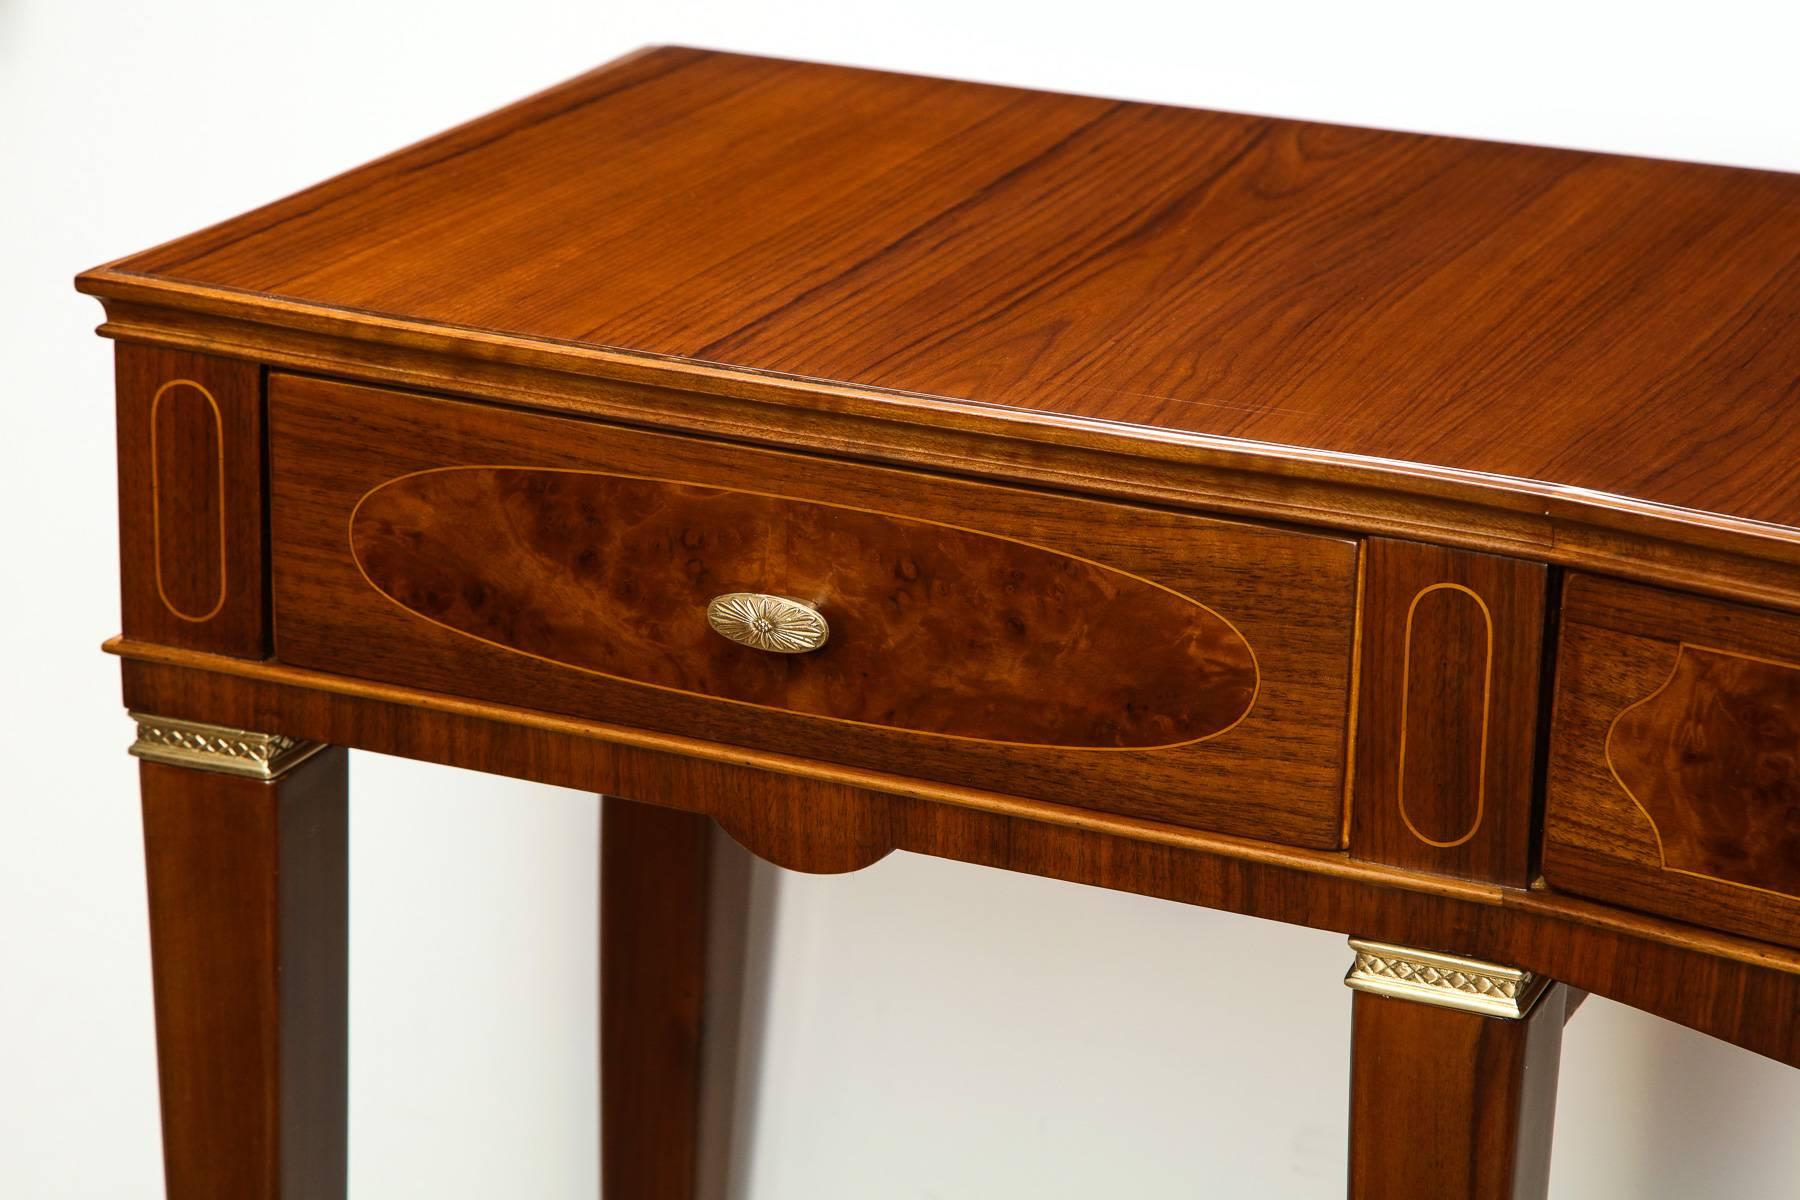 Paolo Buff three-drawer console table. Extraordinary table of teak, mahogany and burled wood with light wood inlays. Bowed center front section, three drawers with cast brass pulls and brass mounts on legs. An excellent example of the cabinet making